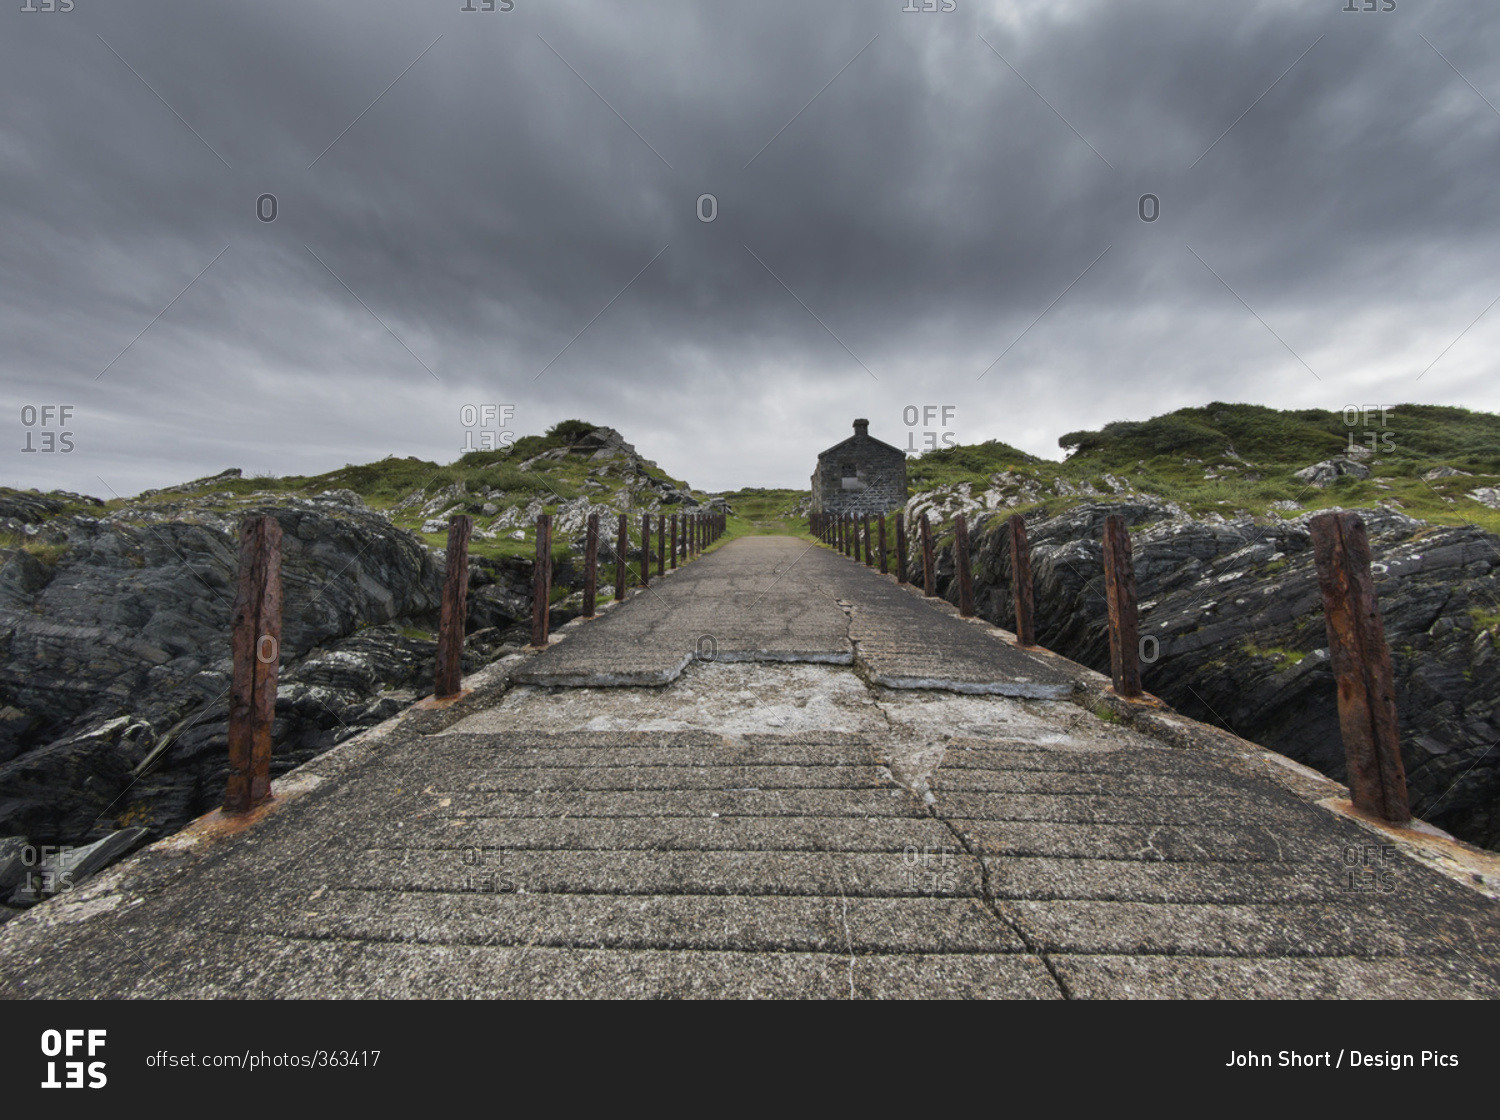 Broken, worn and weathered concrete path under storm clouds; Argyll and Bute, Scotland